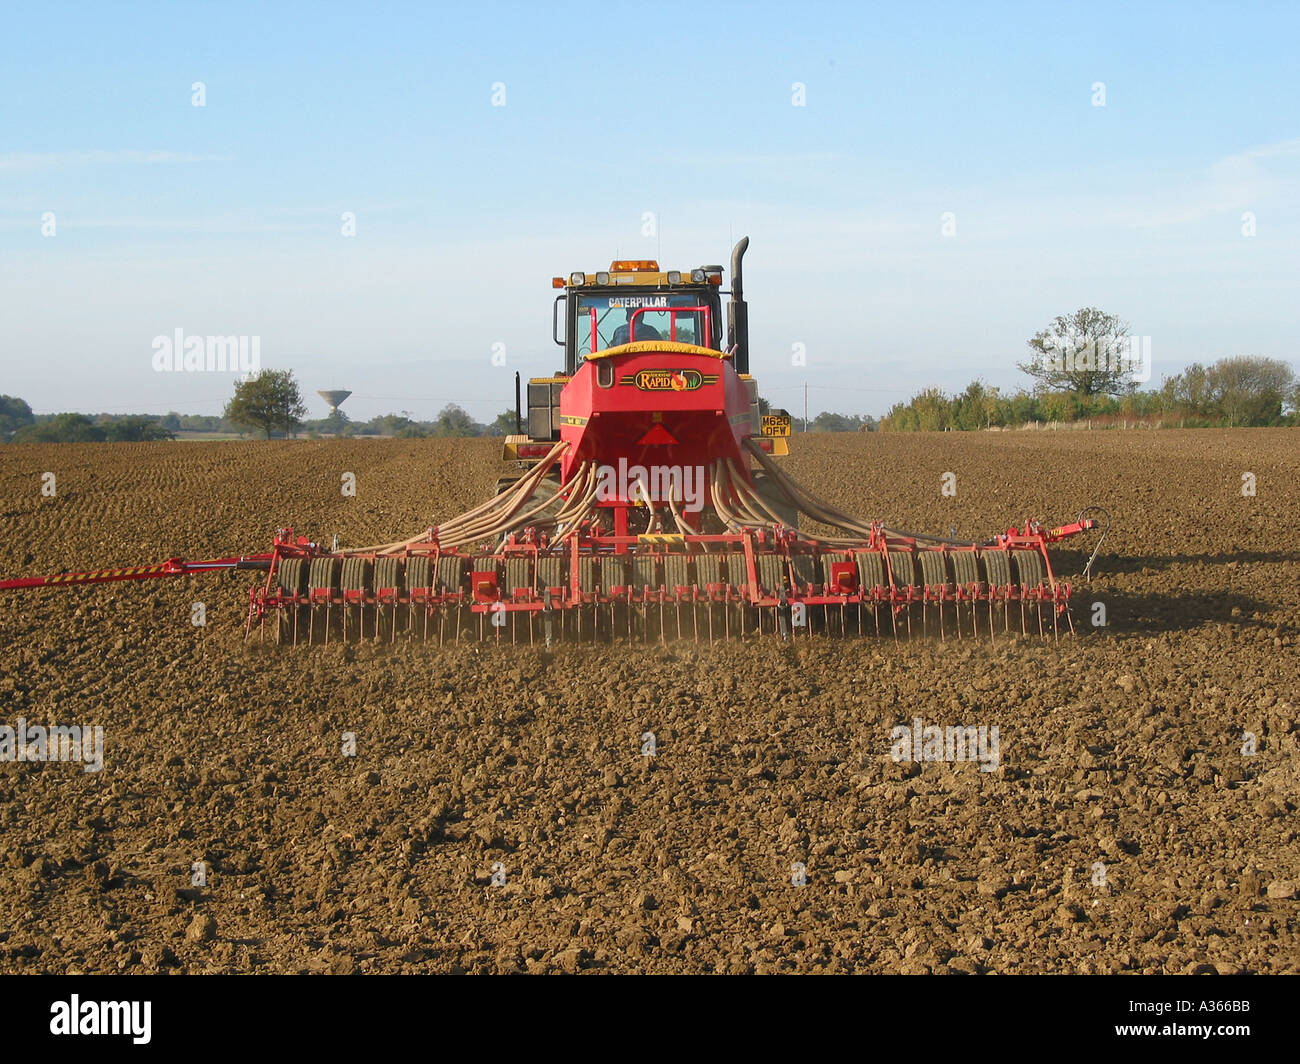 Seed drill, tractor sowing seed for crops, agricultural farming machinery Drilling the field, Norfolk, England, United Kingdom Stock Photo